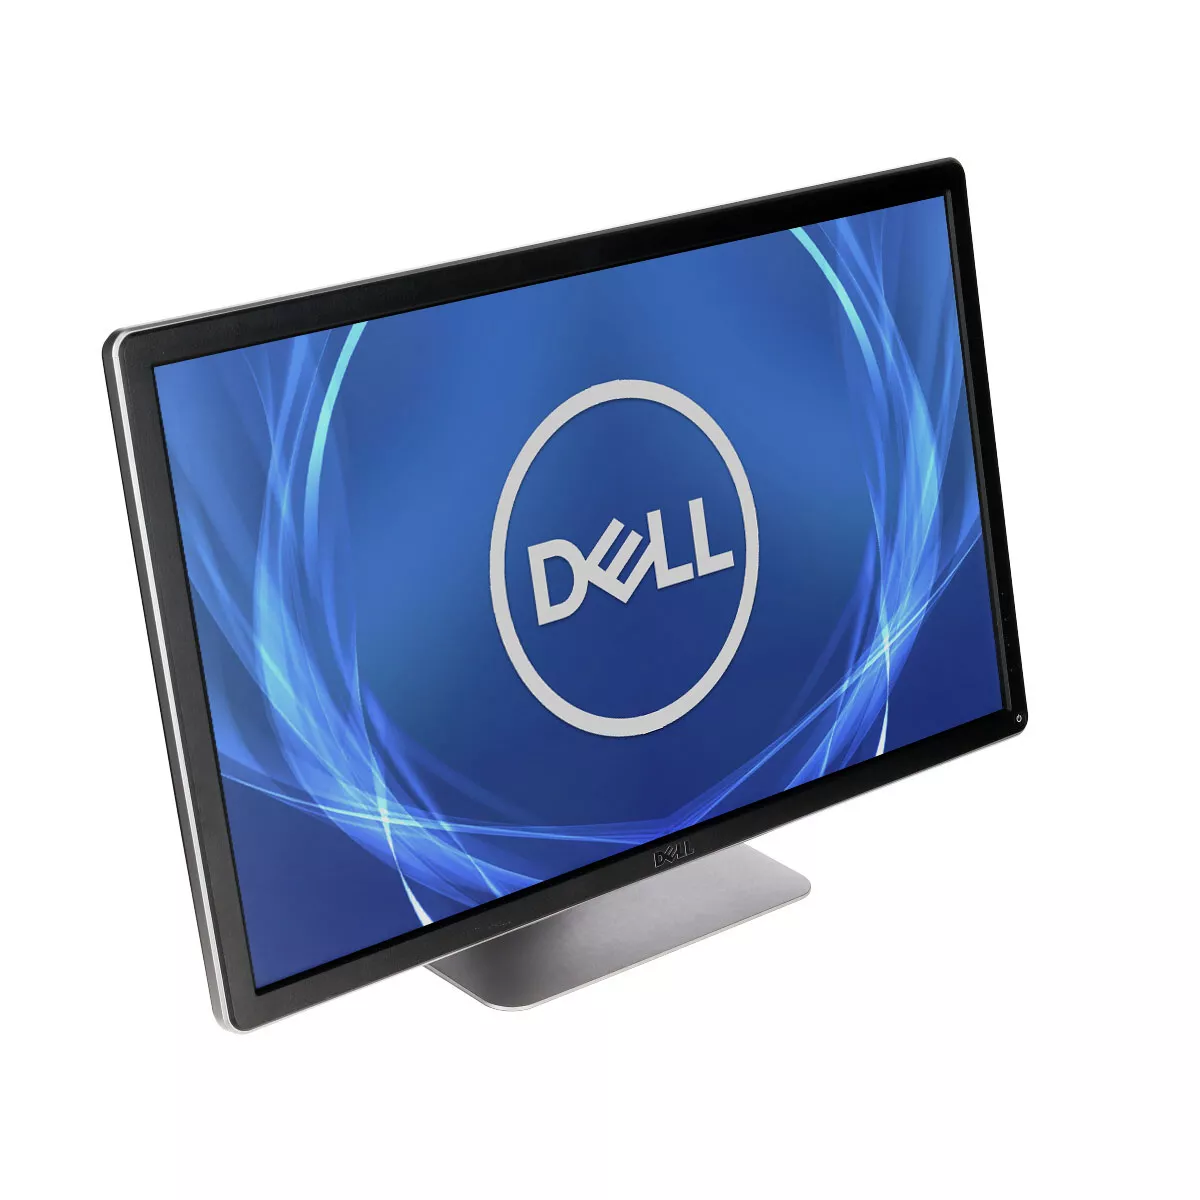 Dell P2314ht 23 Zoll LED A+